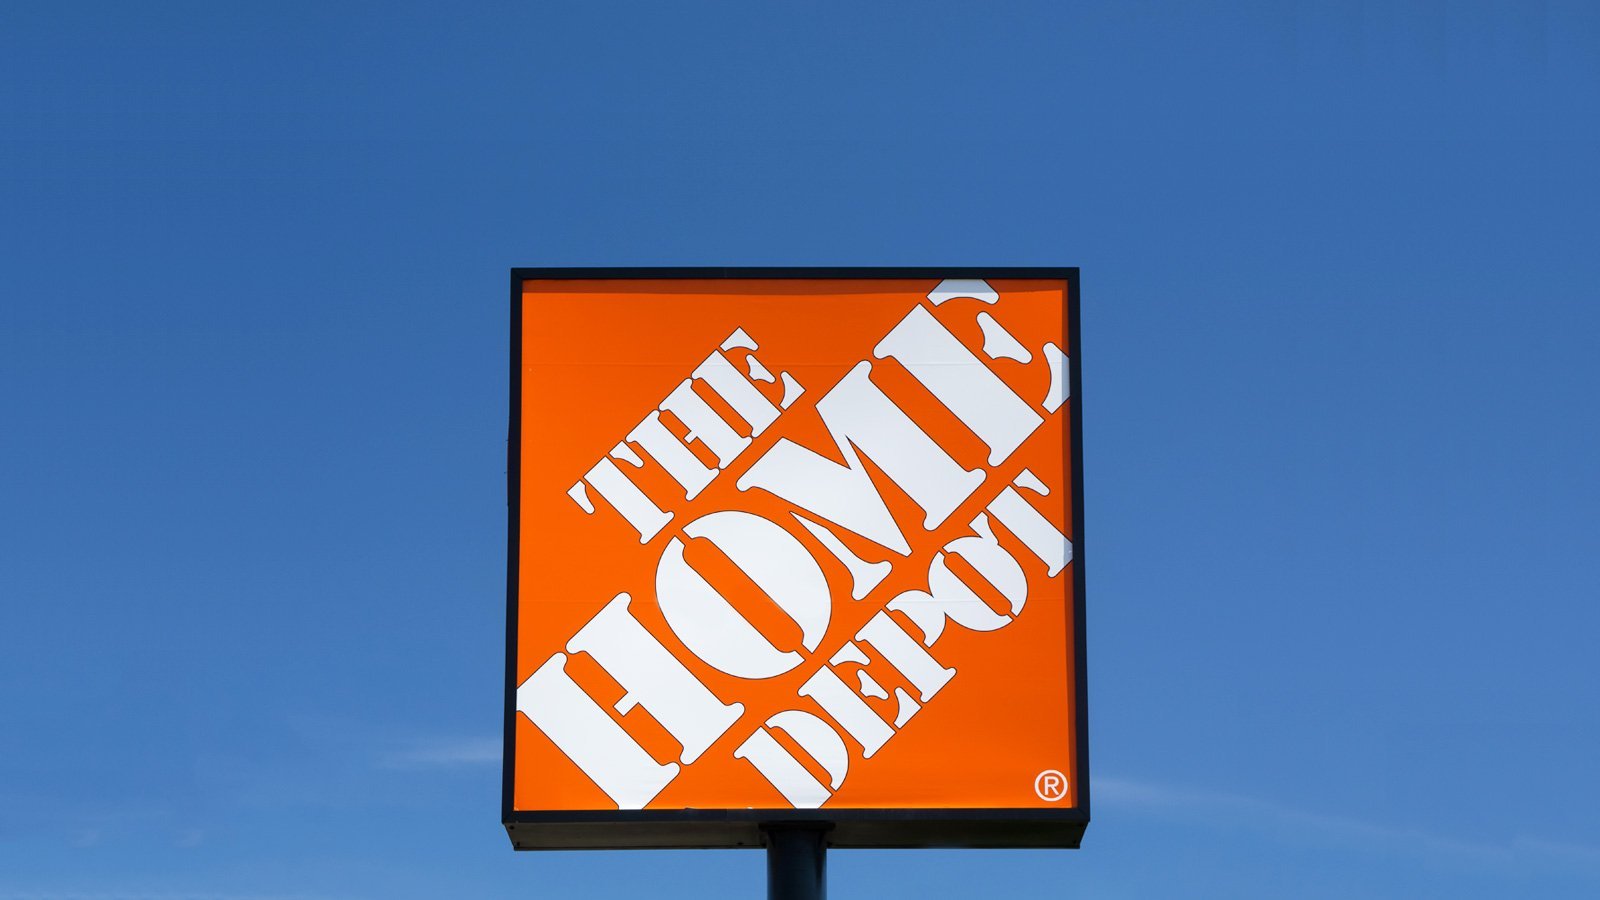 Home Depot confirms third-party data breach exposed employee info